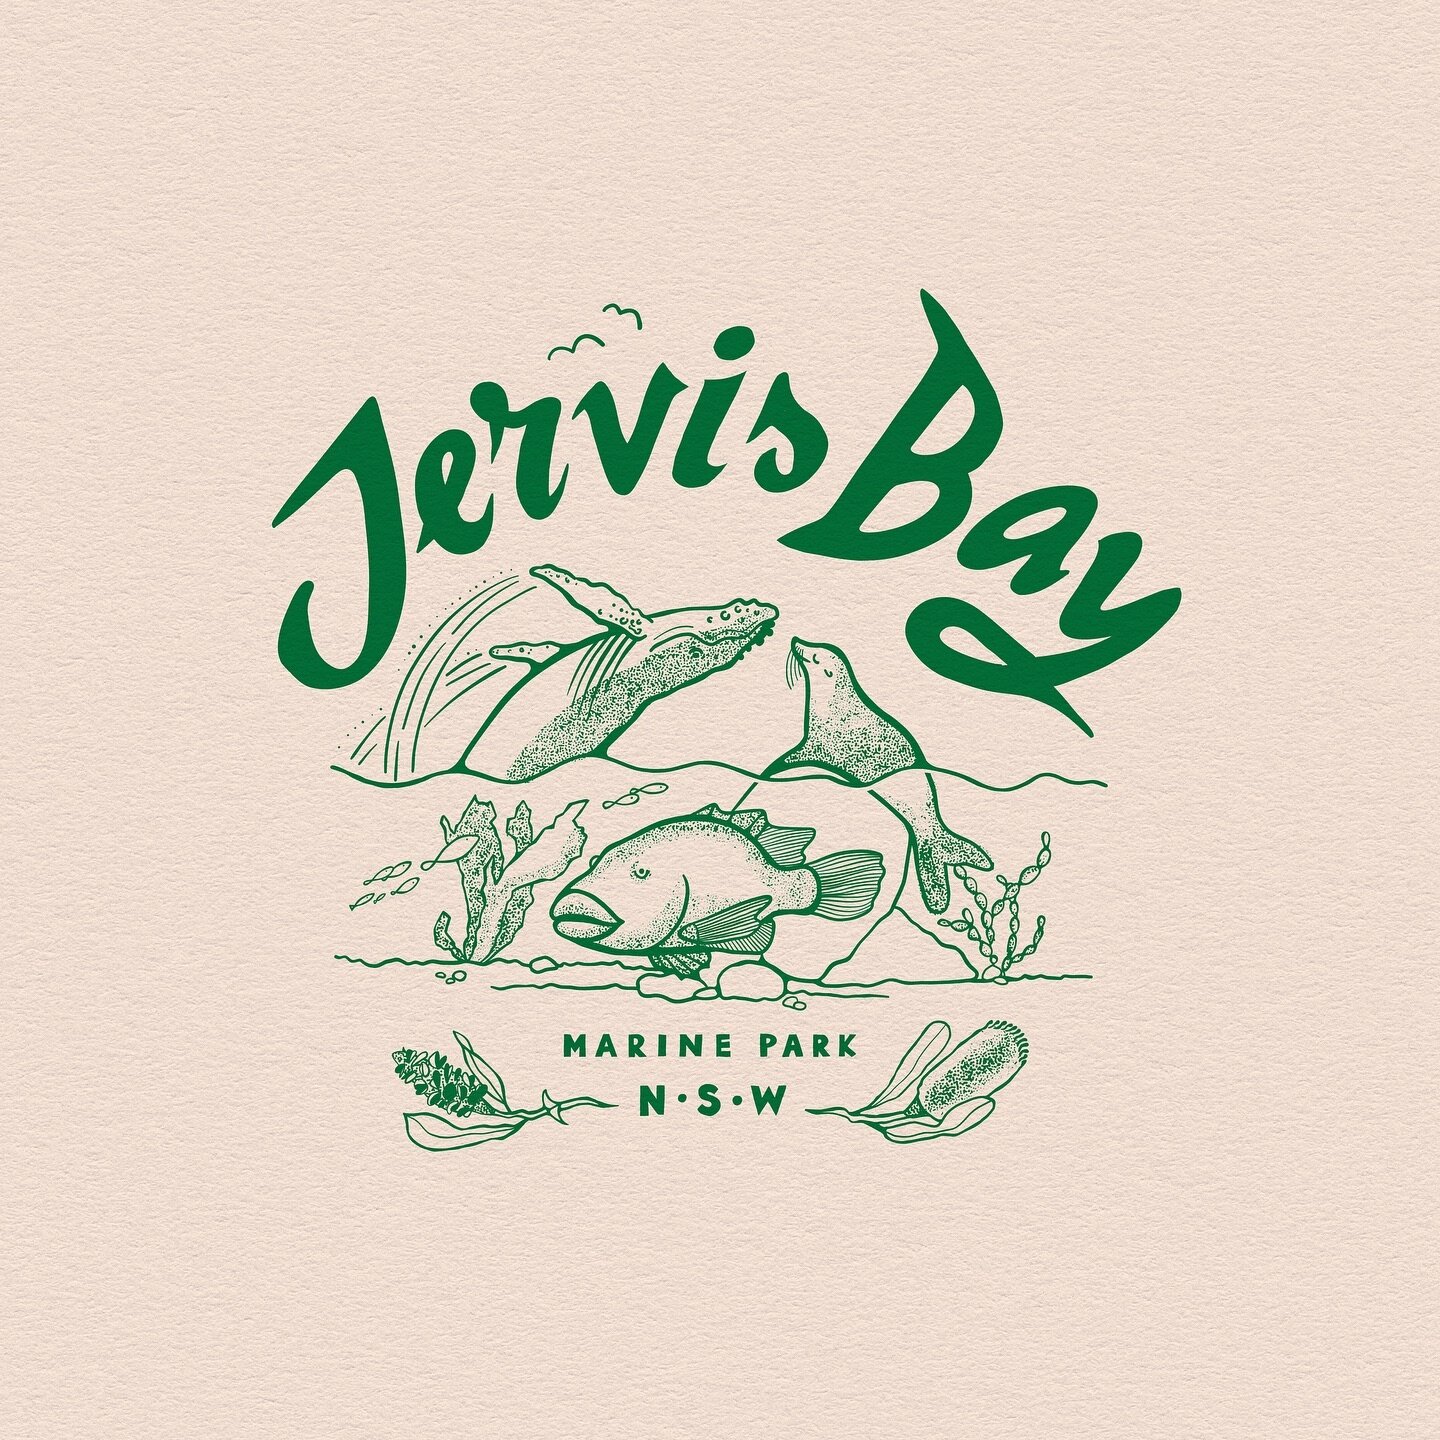 Here&rsquo;s an illustration we did recently for @woebegone_freedive ! We wanted to showcase the gentle and curious creatures you may come across on one of their adventures in the Jervis Bay area 🐠🐳🦑🦈🪸

If you have a business or personal project